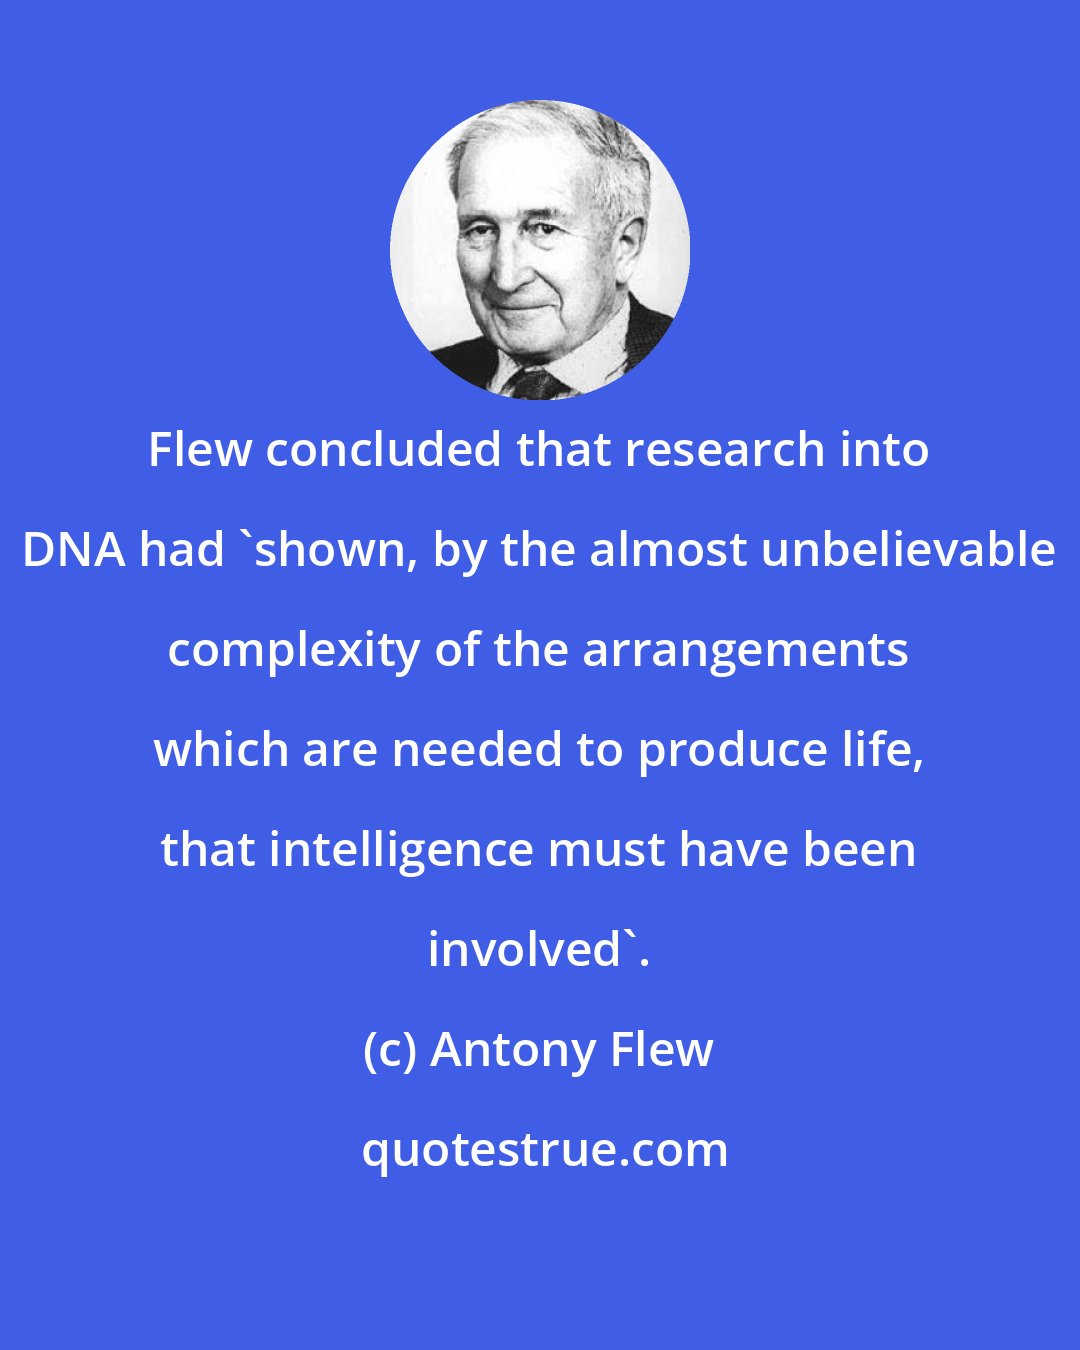 Antony Flew: Flew concluded that research into DNA had 'shown, by the almost unbelievable complexity of the arrangements which are needed to produce life, that intelligence must have been involved'.